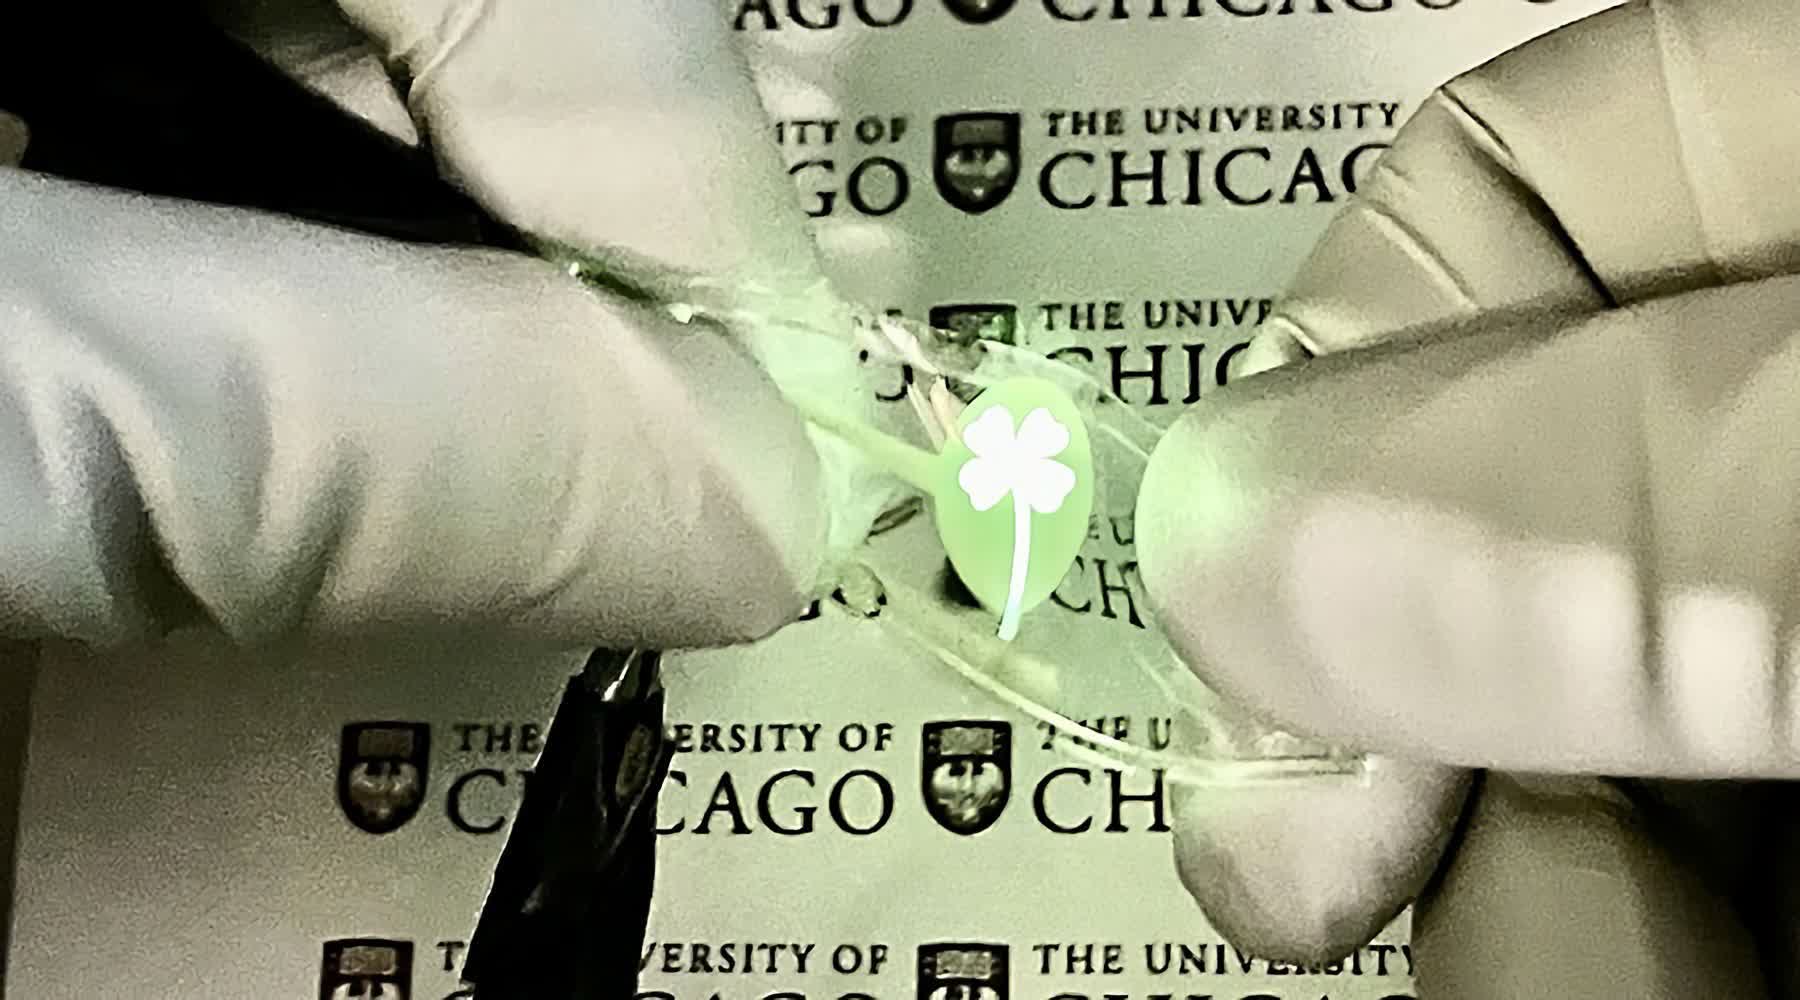 Researchers show off extremely flexible OLED display that stretches to twice its size